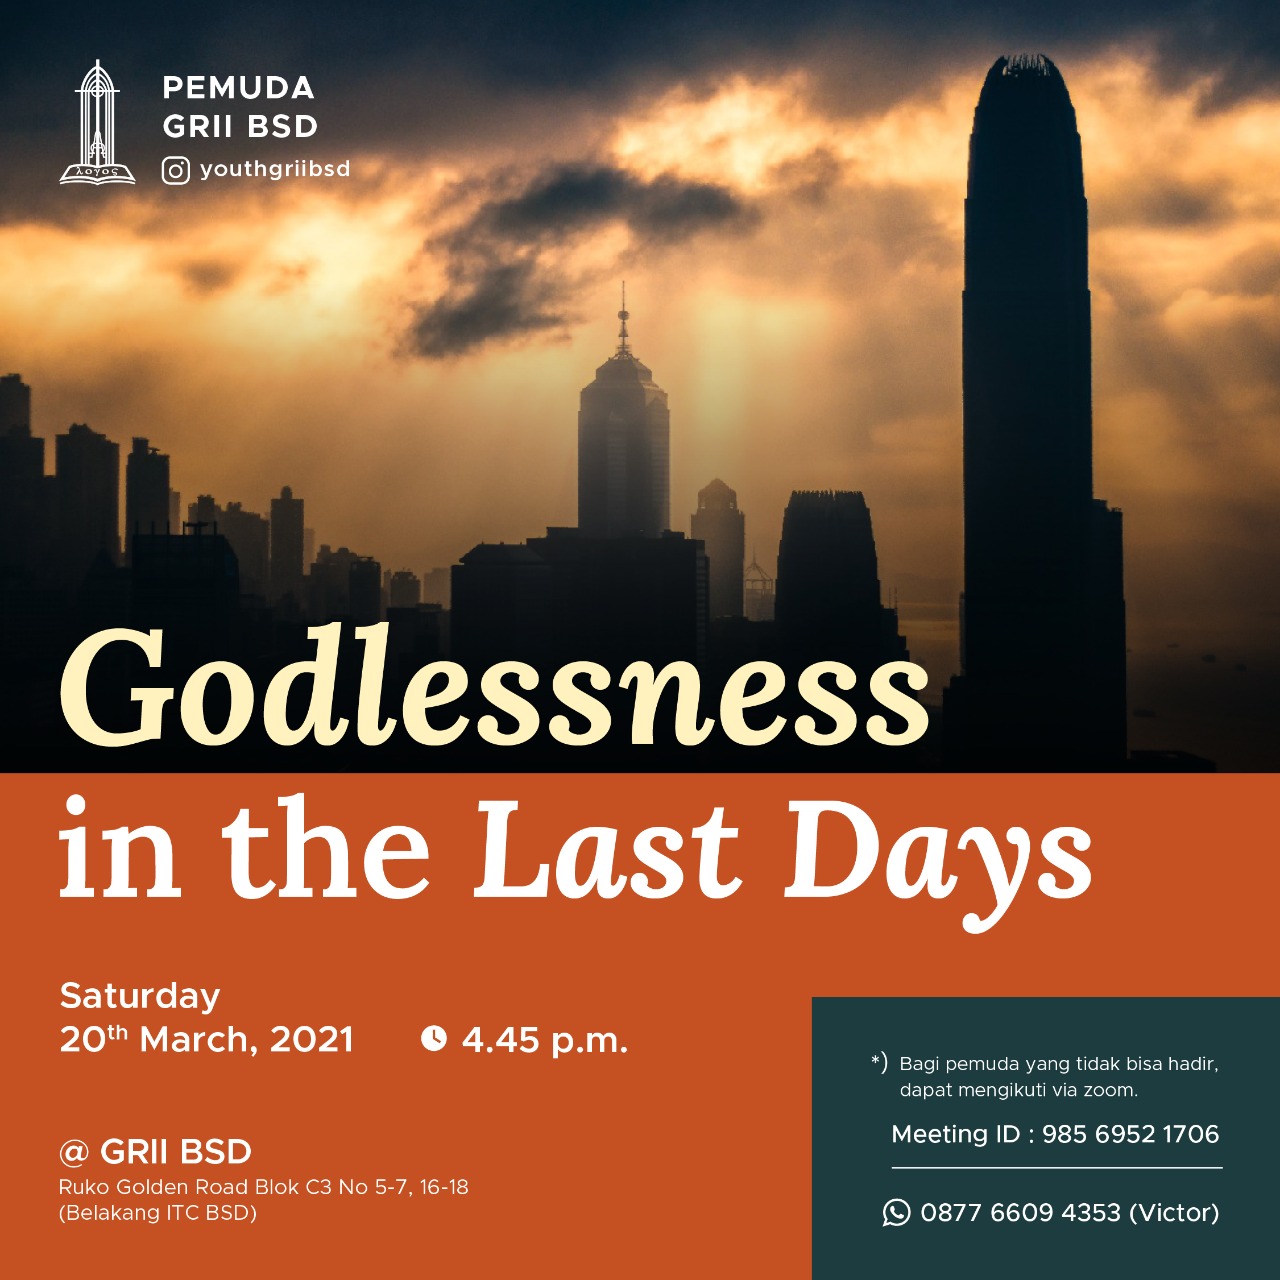 Godlessness in the Last Days